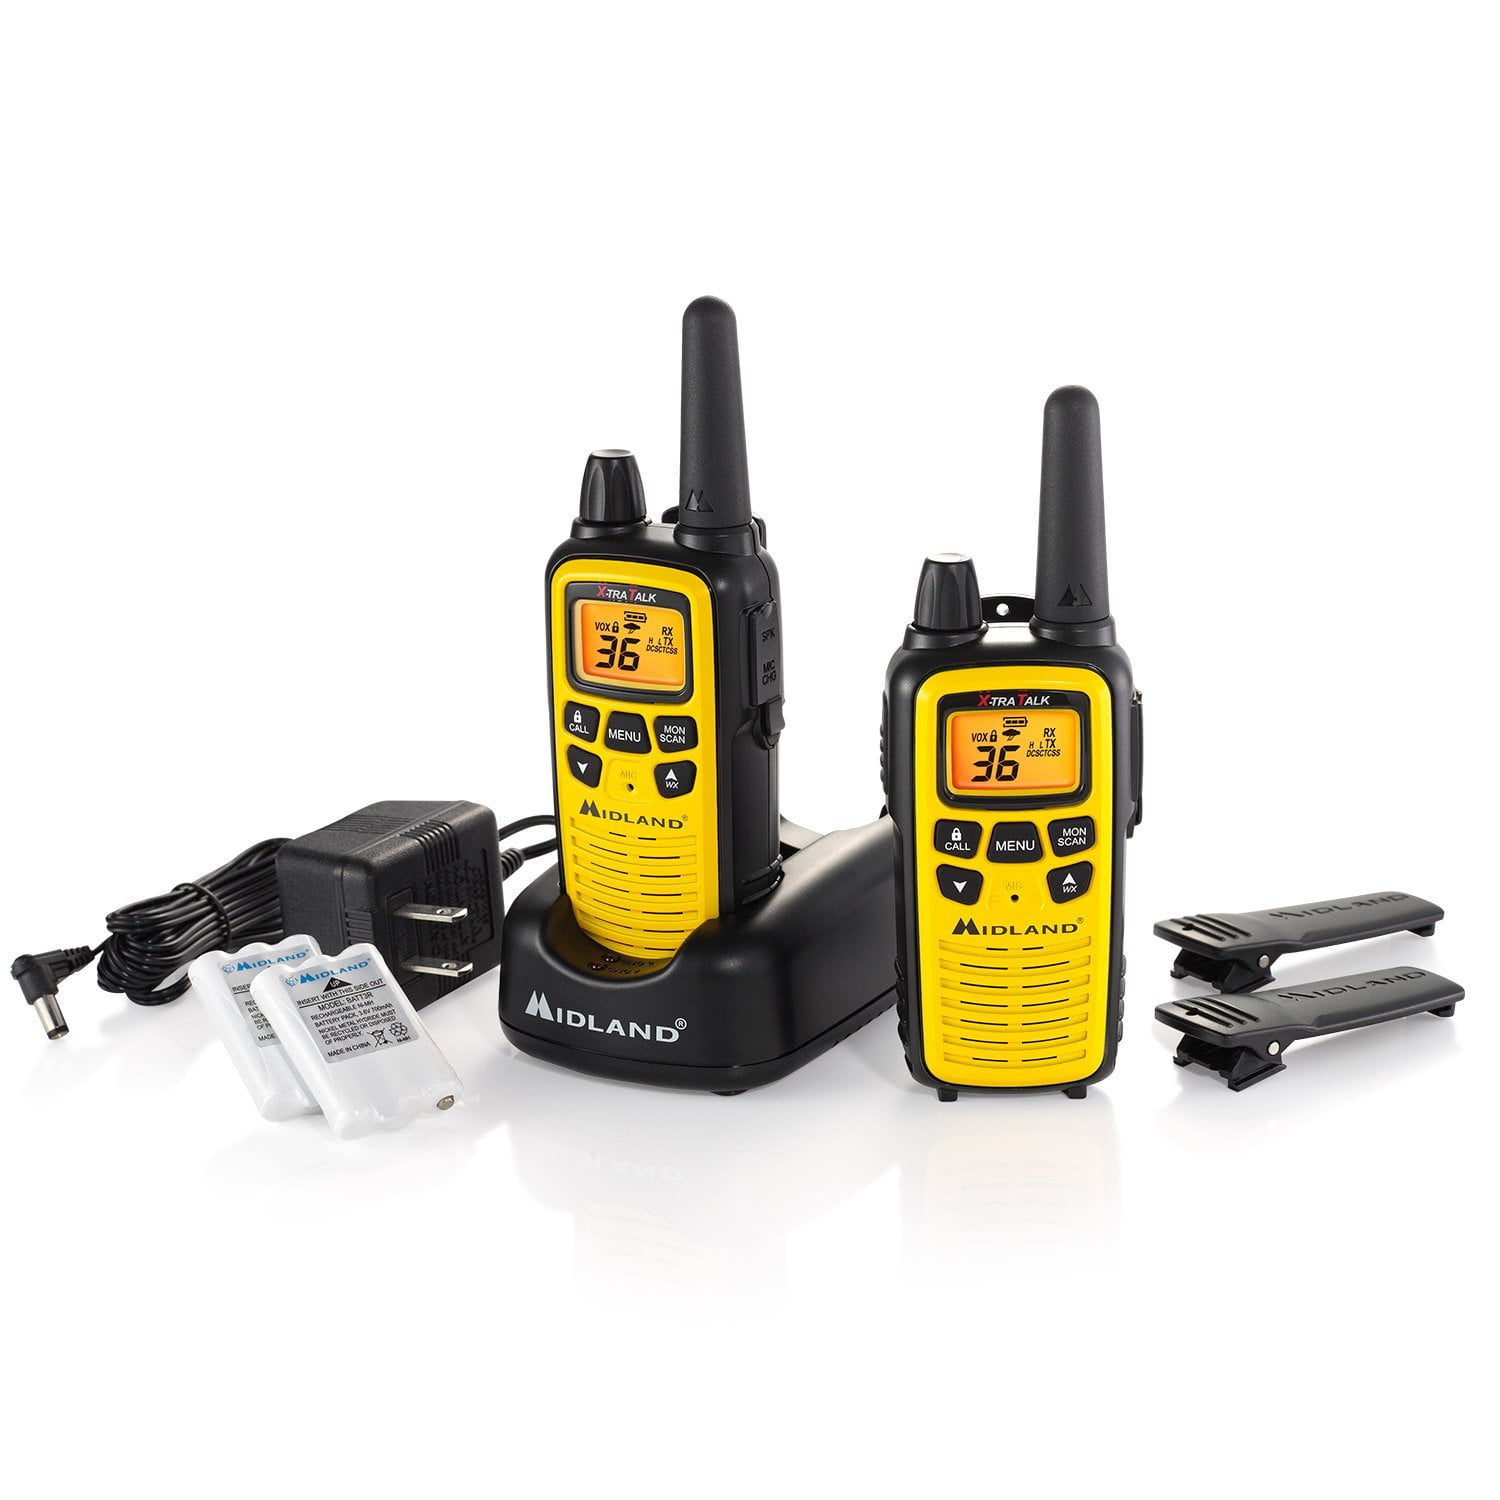 Midland T61VP3 36 Channel FRS Two-Way Radio Yellow/Black Up to 32 Mile Range Walkie Talkie Pack of 6 